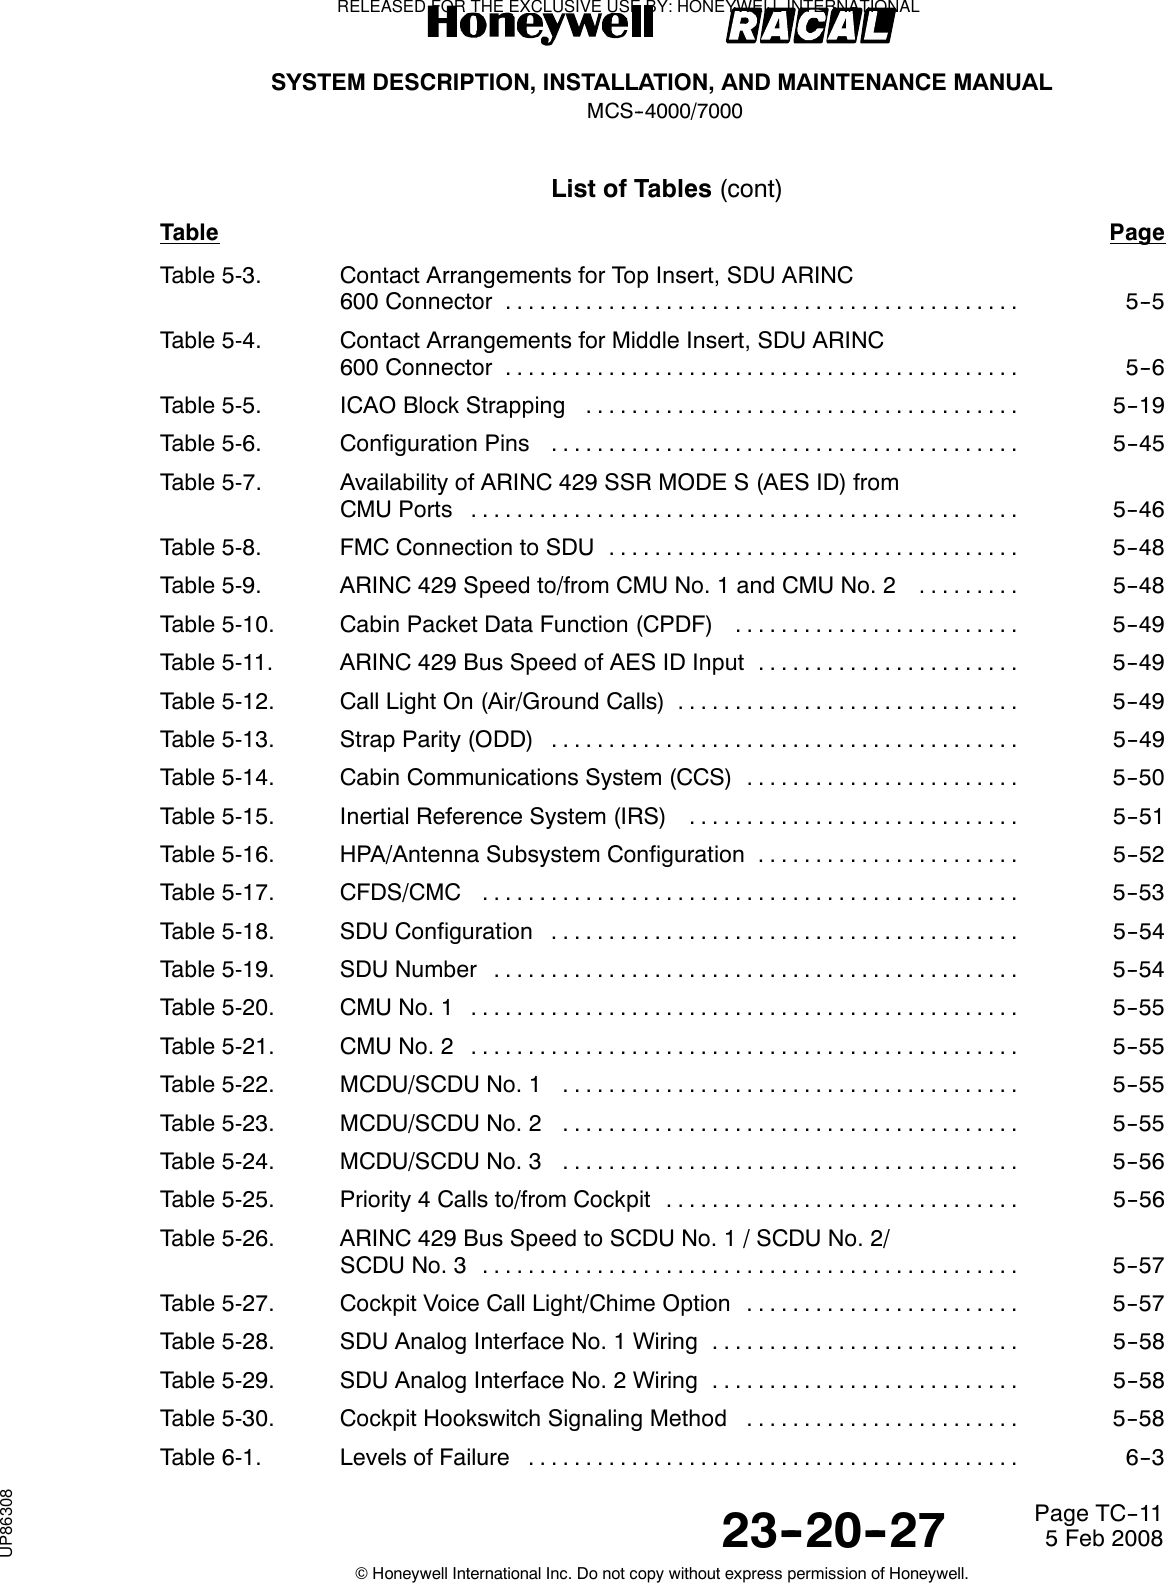 SYSTEM DESCRIPTION, INSTALLATION, AND MAINTENANCE MANUALMCS--4000/700023--20--27 5 Feb 2008©Honeywell International Inc. Do not copy without express permission of Honeywell.Page TC--11List of Tables (cont)Table PageTable 5-3. Contact Arrangements for Top Insert, SDU ARINC600 Connector 5--5.............................................Table 5-4. Contact Arrangements for Middle Insert, SDU ARINC600 Connector 5--6.............................................Table 5-5. ICAO Block Strapping 5--19......................................Table 5-6. Configuration Pins 5--45.........................................Table 5-7. Availability of ARINC 429 SSR MODE S (AES ID) fromCMU Ports 5--46................................................Table 5-8. FMC Connection to SDU 5--48....................................Table 5-9. ARINC 429 Speed to/from CMU No. 1 and CMU No. 2 5--48.........Table 5-10. Cabin Packet Data Function (CPDF) 5--49.........................Table 5-11. ARINC 429 Bus Speed of AES ID Input 5--49.......................Table 5-12. Call Light On (Air/Ground Calls) 5--49..............................Table 5-13. Strap Parity (ODD) 5--49.........................................Table 5-14. Cabin Communications System (CCS) 5--50........................Table 5-15. Inertial Reference System (IRS) 5--51.............................Table 5-16. HPA/Antenna Subsystem Configuration 5--52.......................Table 5-17. CFDS/CMC 5--53...............................................Table 5-18. SDU Configuration 5--54.........................................Table 5-19. SDU Number 5--54..............................................Table 5-20. CMU No. 1 5--55................................................Table 5-21. CMU No. 2 5--55................................................Table 5-22. MCDU/SCDU No. 1 5--55........................................Table 5-23. MCDU/SCDU No. 2 5--55........................................Table 5-24. MCDU/SCDU No. 3 5--56........................................Table 5-25. Priority 4 Calls to/from Cockpit 5--56...............................Table 5-26. ARINC 429 Bus Speed to SCDU No. 1 / SCDU No. 2/SCDU No. 3 5--57...............................................Table 5-27. Cockpit Voice Call Light/Chime Option 5--57........................Table 5-28. SDU Analog Interface No. 1 Wiring 5--58...........................Table 5-29. SDU Analog Interface No. 2 Wiring 5--58...........................Table 5-30. Cockpit Hookswitch Signaling Method 5--58........................Table 6-1. Levels of Failure 6--3...........................................RELEASED FOR THE EXCLUSIVE USE BY: HONEYWELL INTERNATIONALUP86308